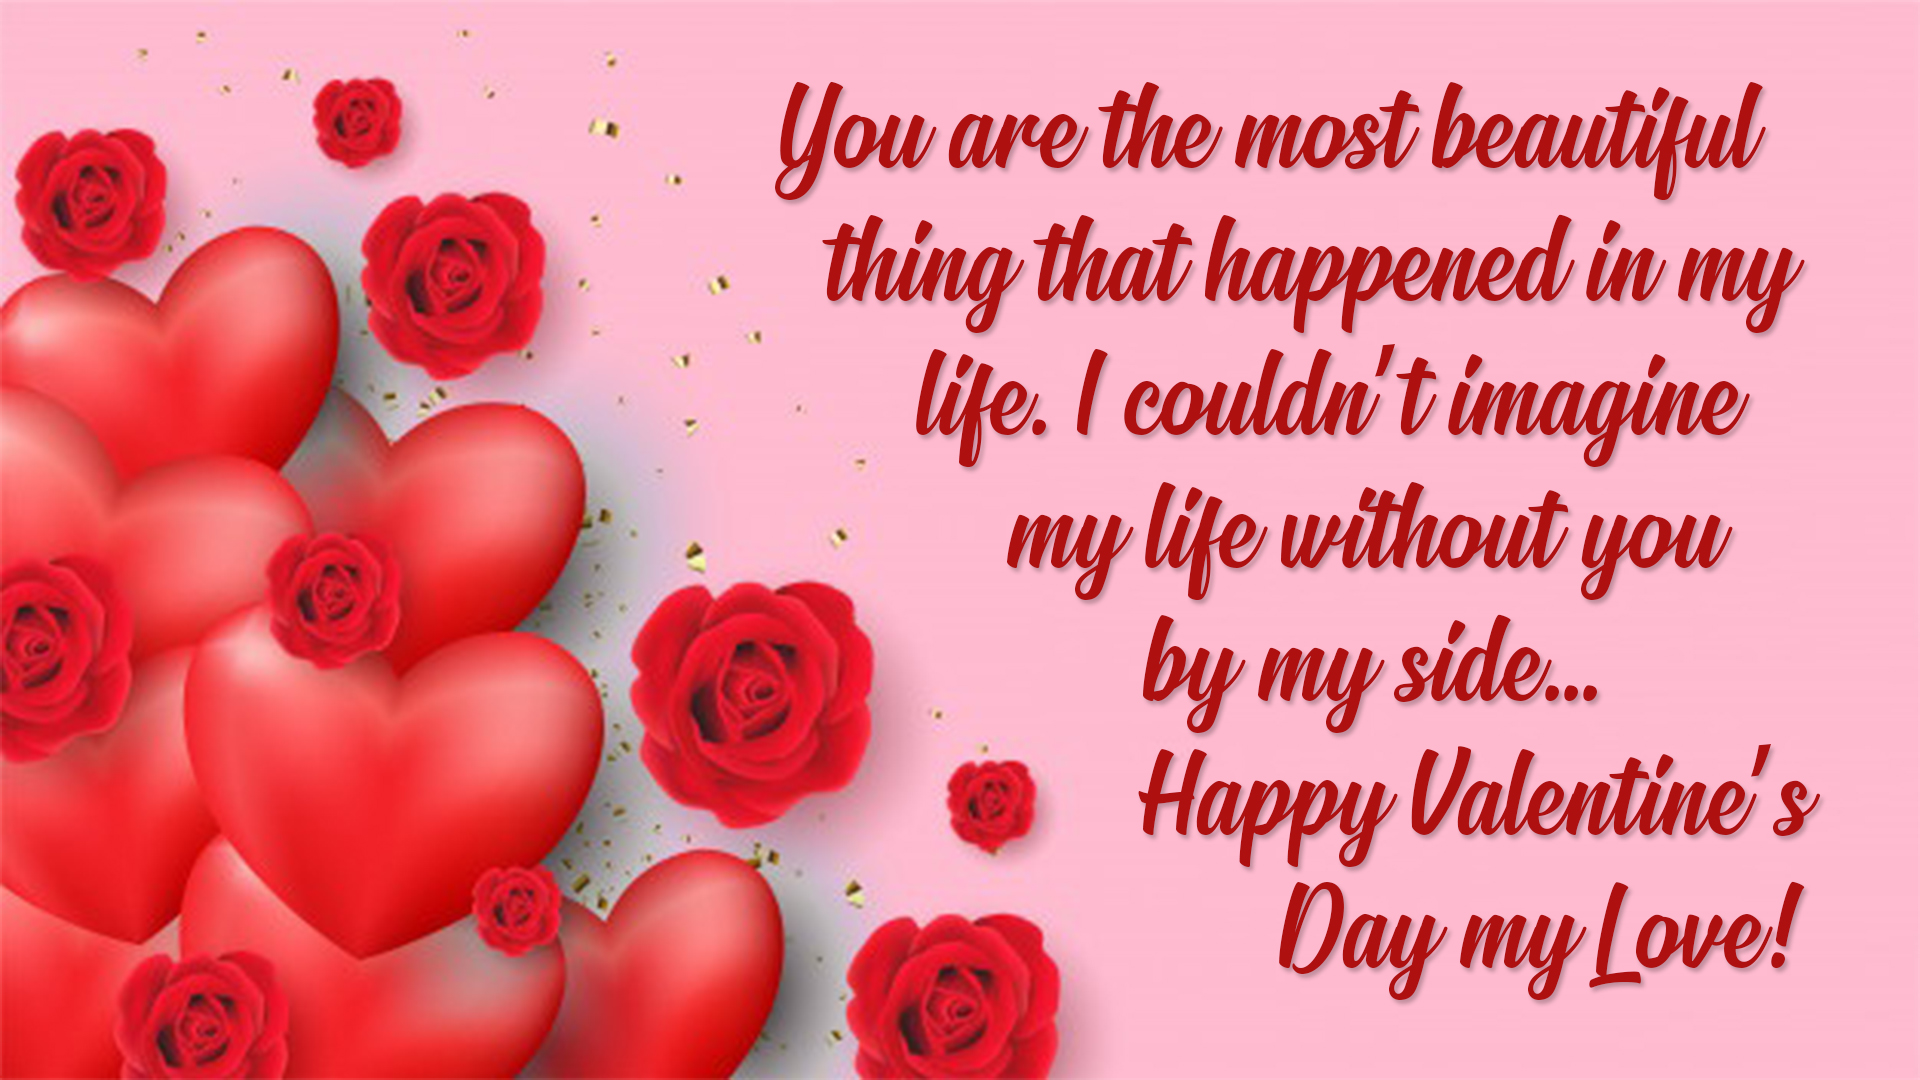 100+ Romantic Valentine Messages And Wishes